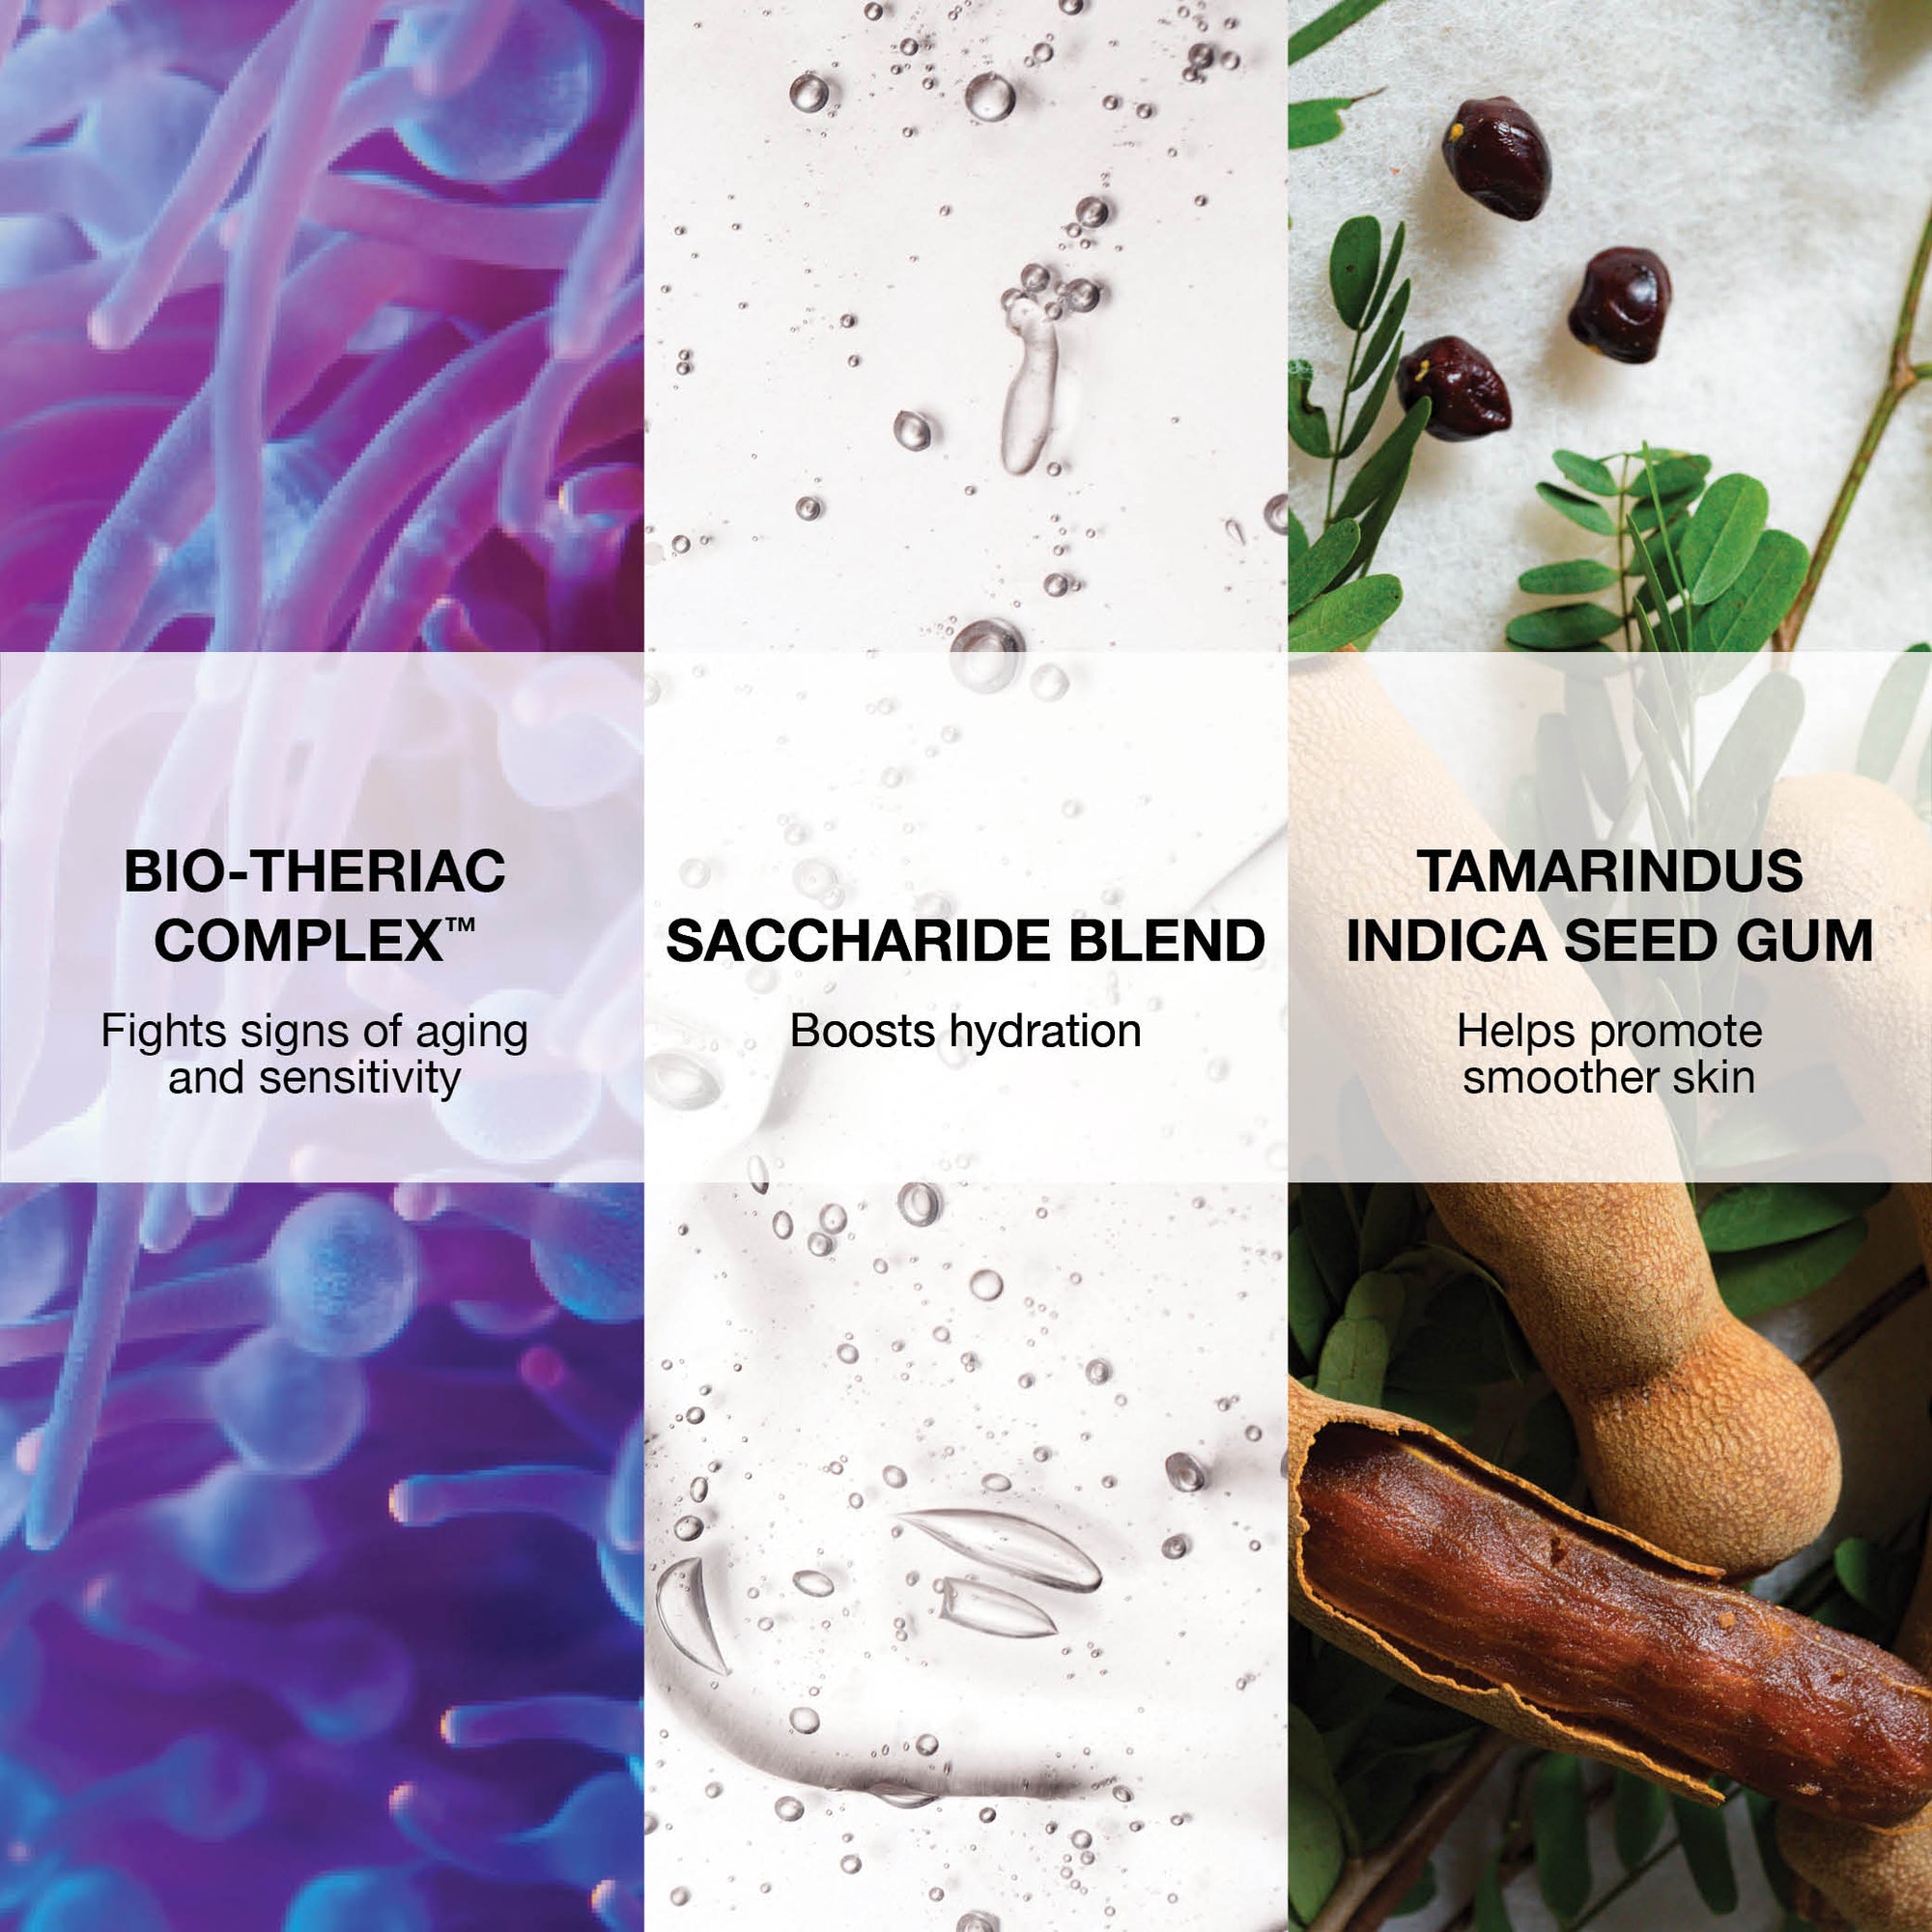 Bio-Theriac Complex: fights signs of aging and sensitivity. Saccharide blend: boosts hydration. Tamarindus Indica seed gum: helps promote smoother skin. 